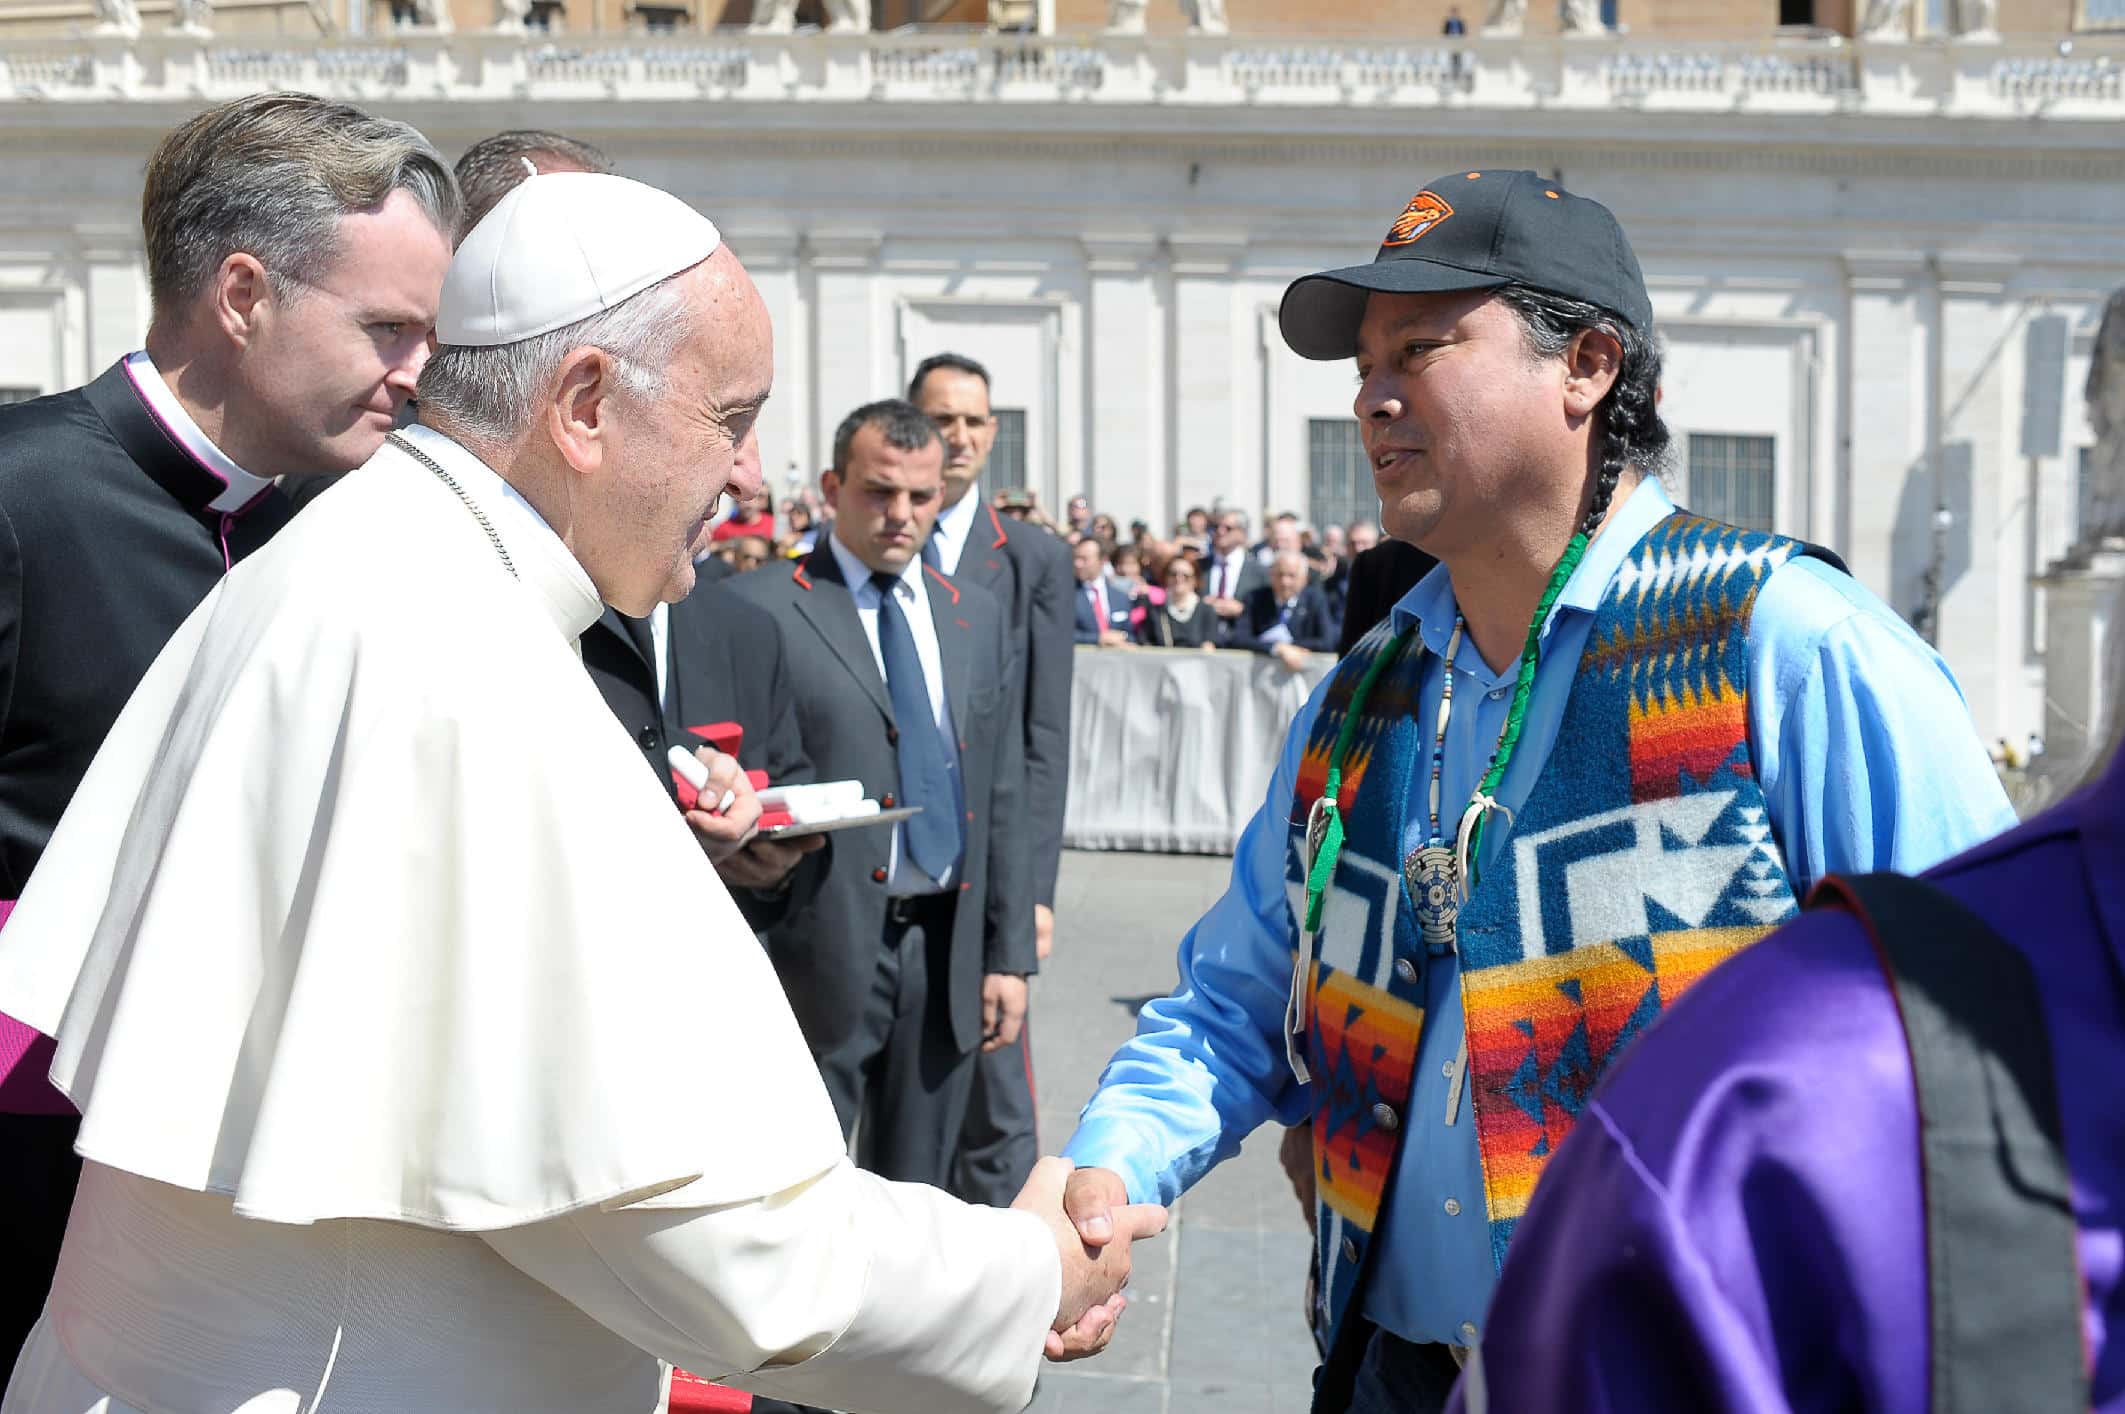 Indigenous delegate David Close meets with Pope Francis during the Long March to Rome and Delegation Lead to the Mission in Rome.